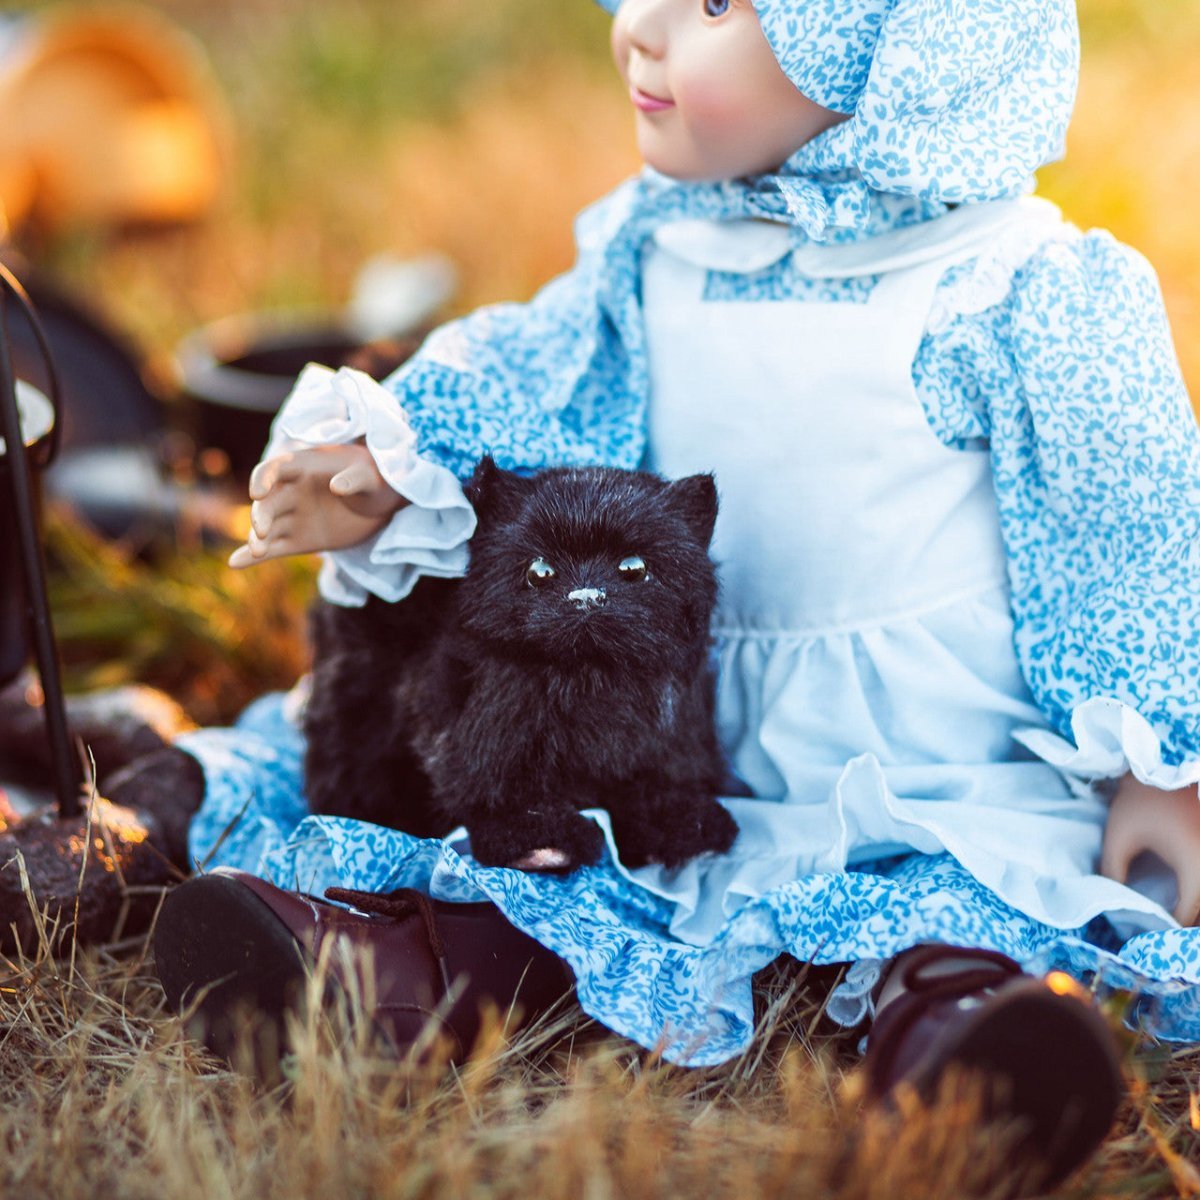 Little House on the Prairie 'Black Susan' Kitty, Pet Accessory Sized For 18 Inch Doll - Simon's Collectibles